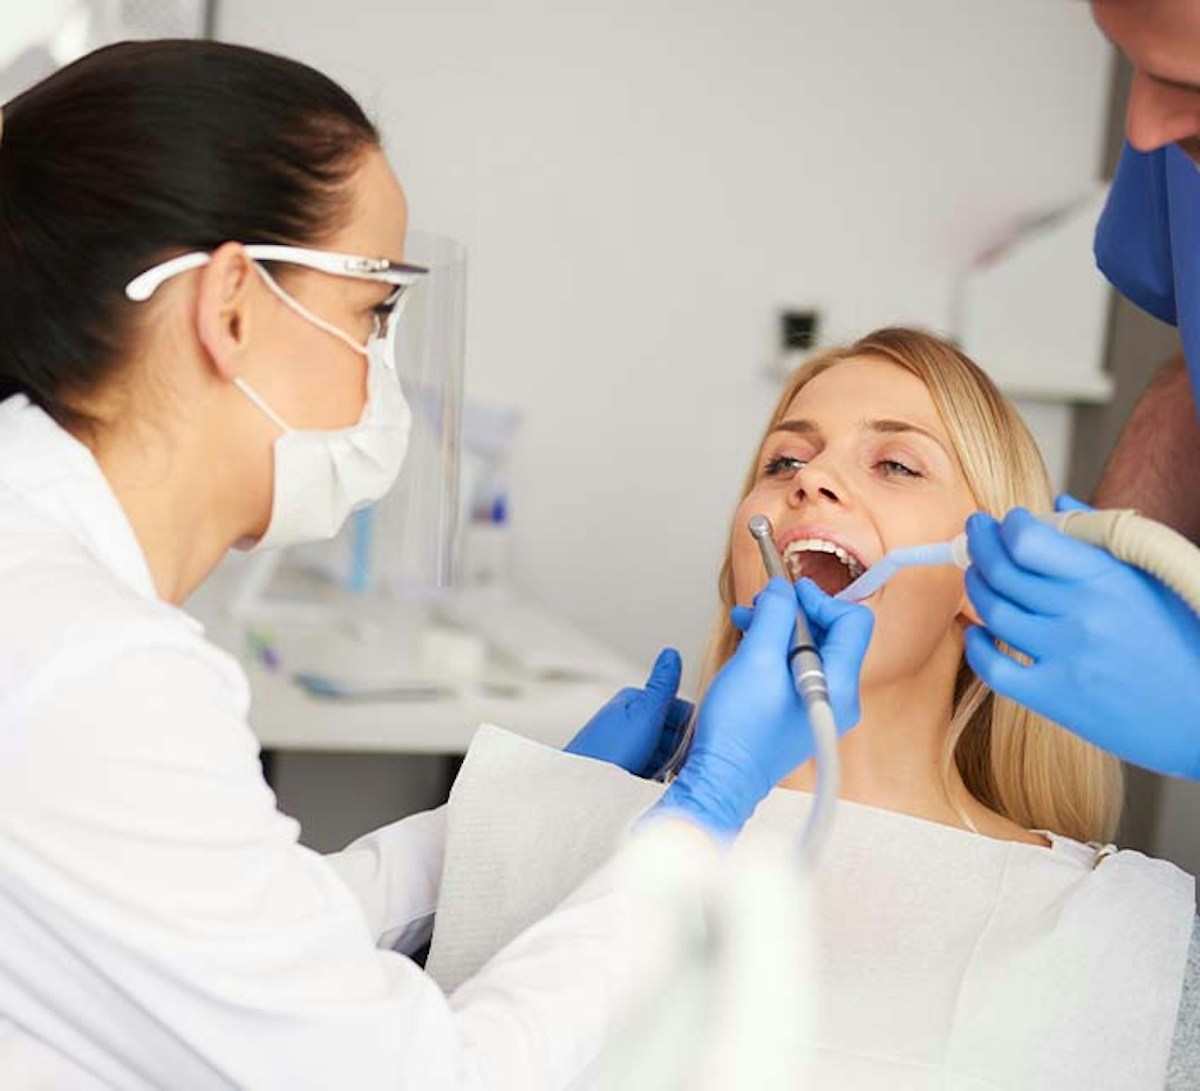 Dental Assistant helping Dentist with a procedure